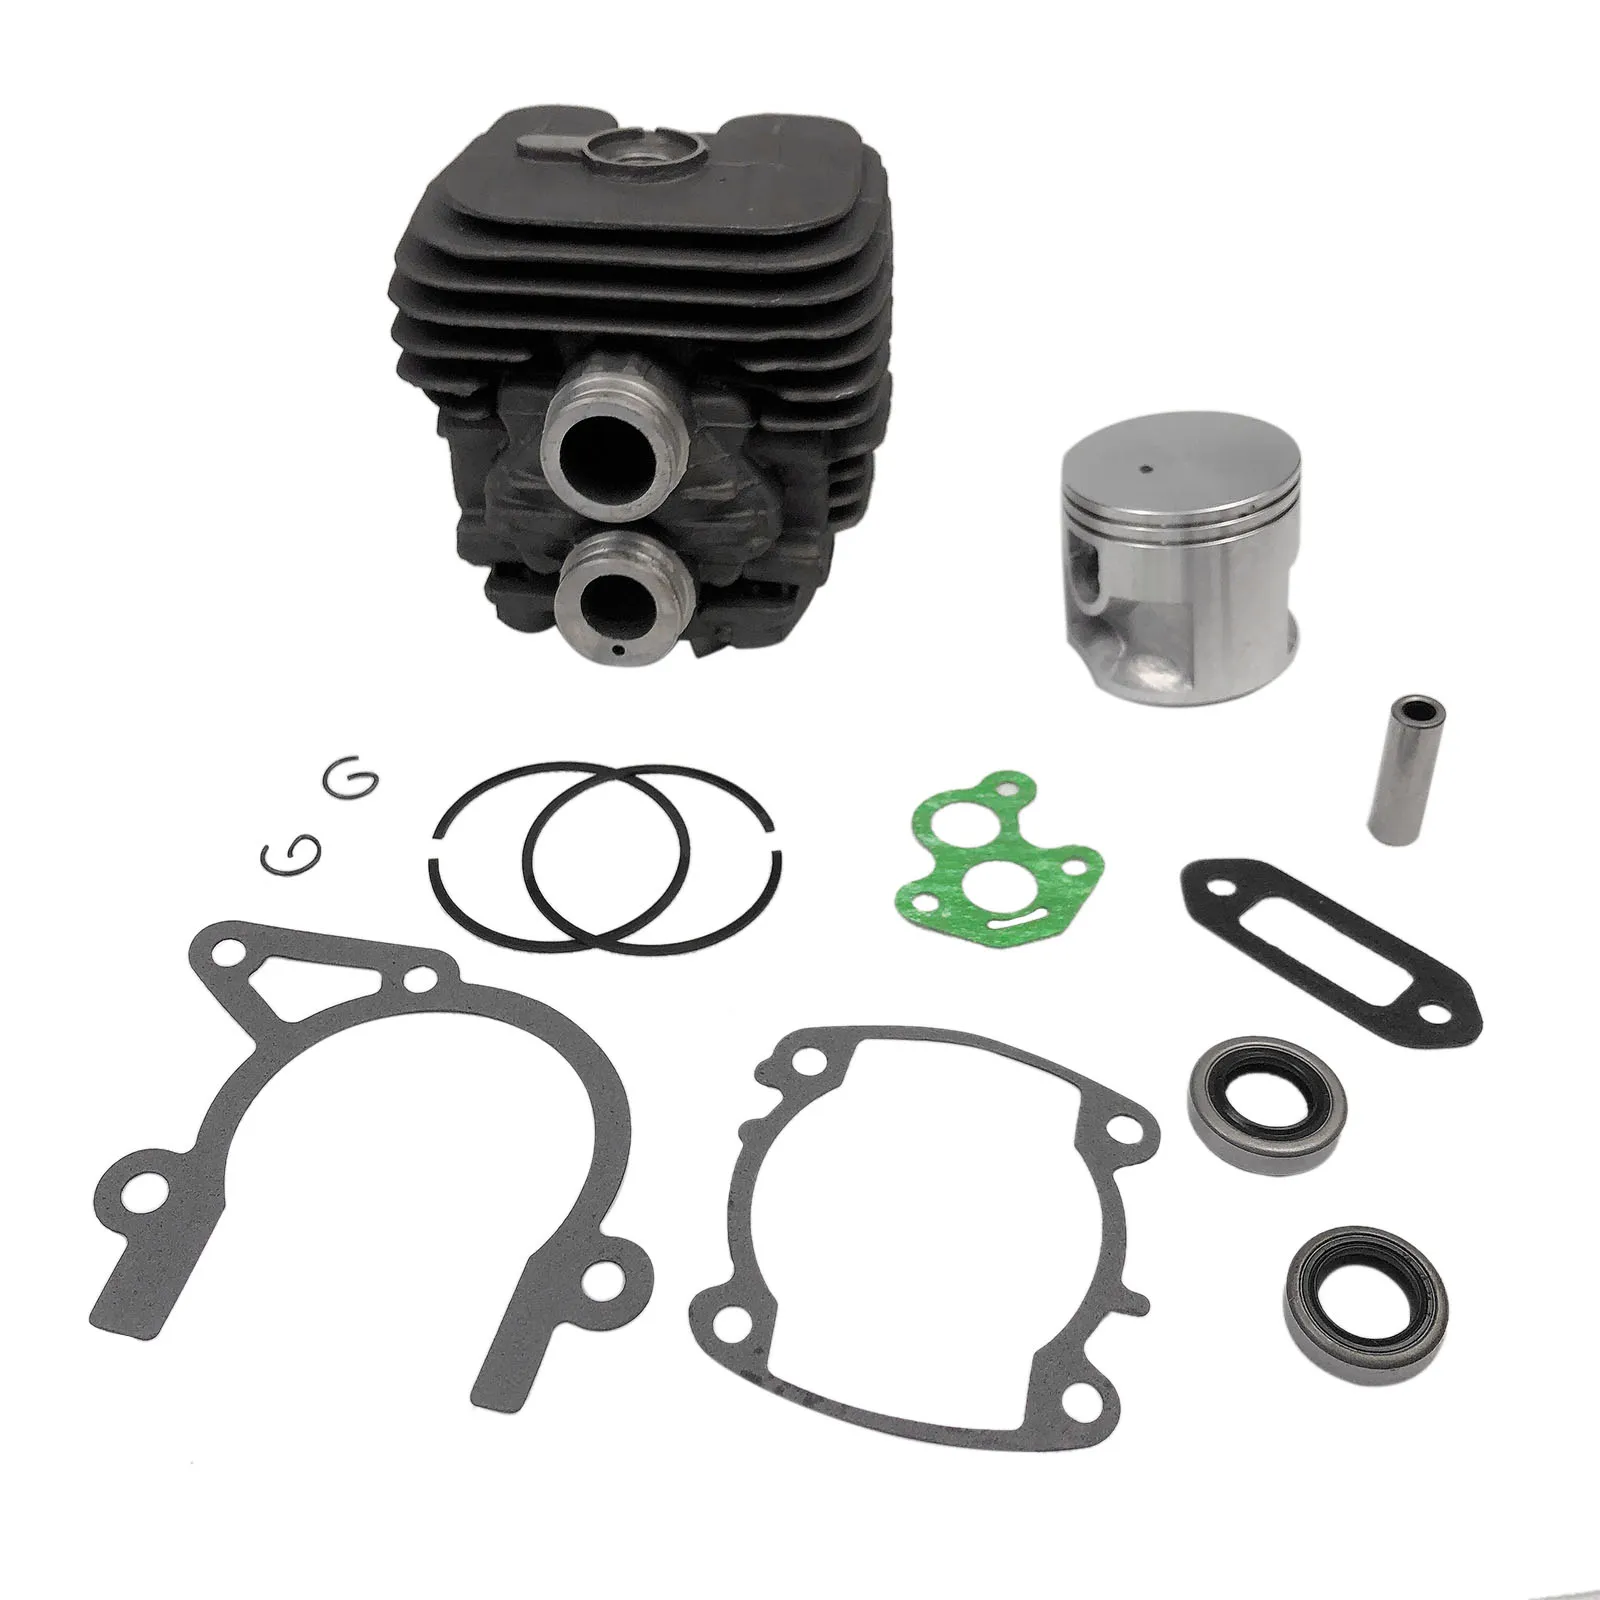 

New High Quality Cylinder Rebuild Kit Fits For Stihl TS410 TS420 Chainsaw Rebuild Spare Parts Durable Replacement Tool Parts